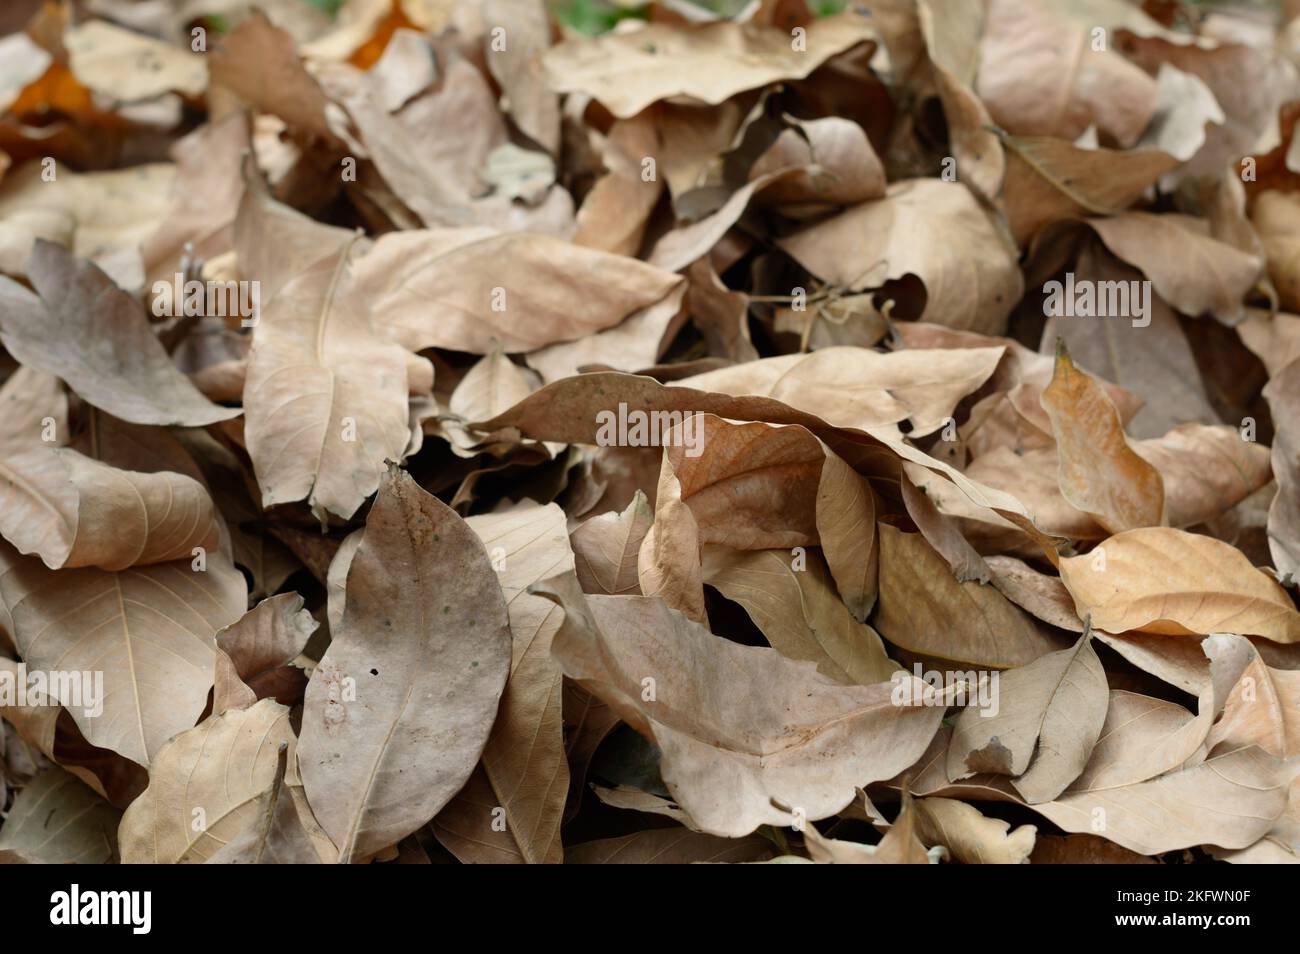 Dry waste leaves of Dead Dried plant natural background. Full Frame. Nature Backgrounds. Stock Photo